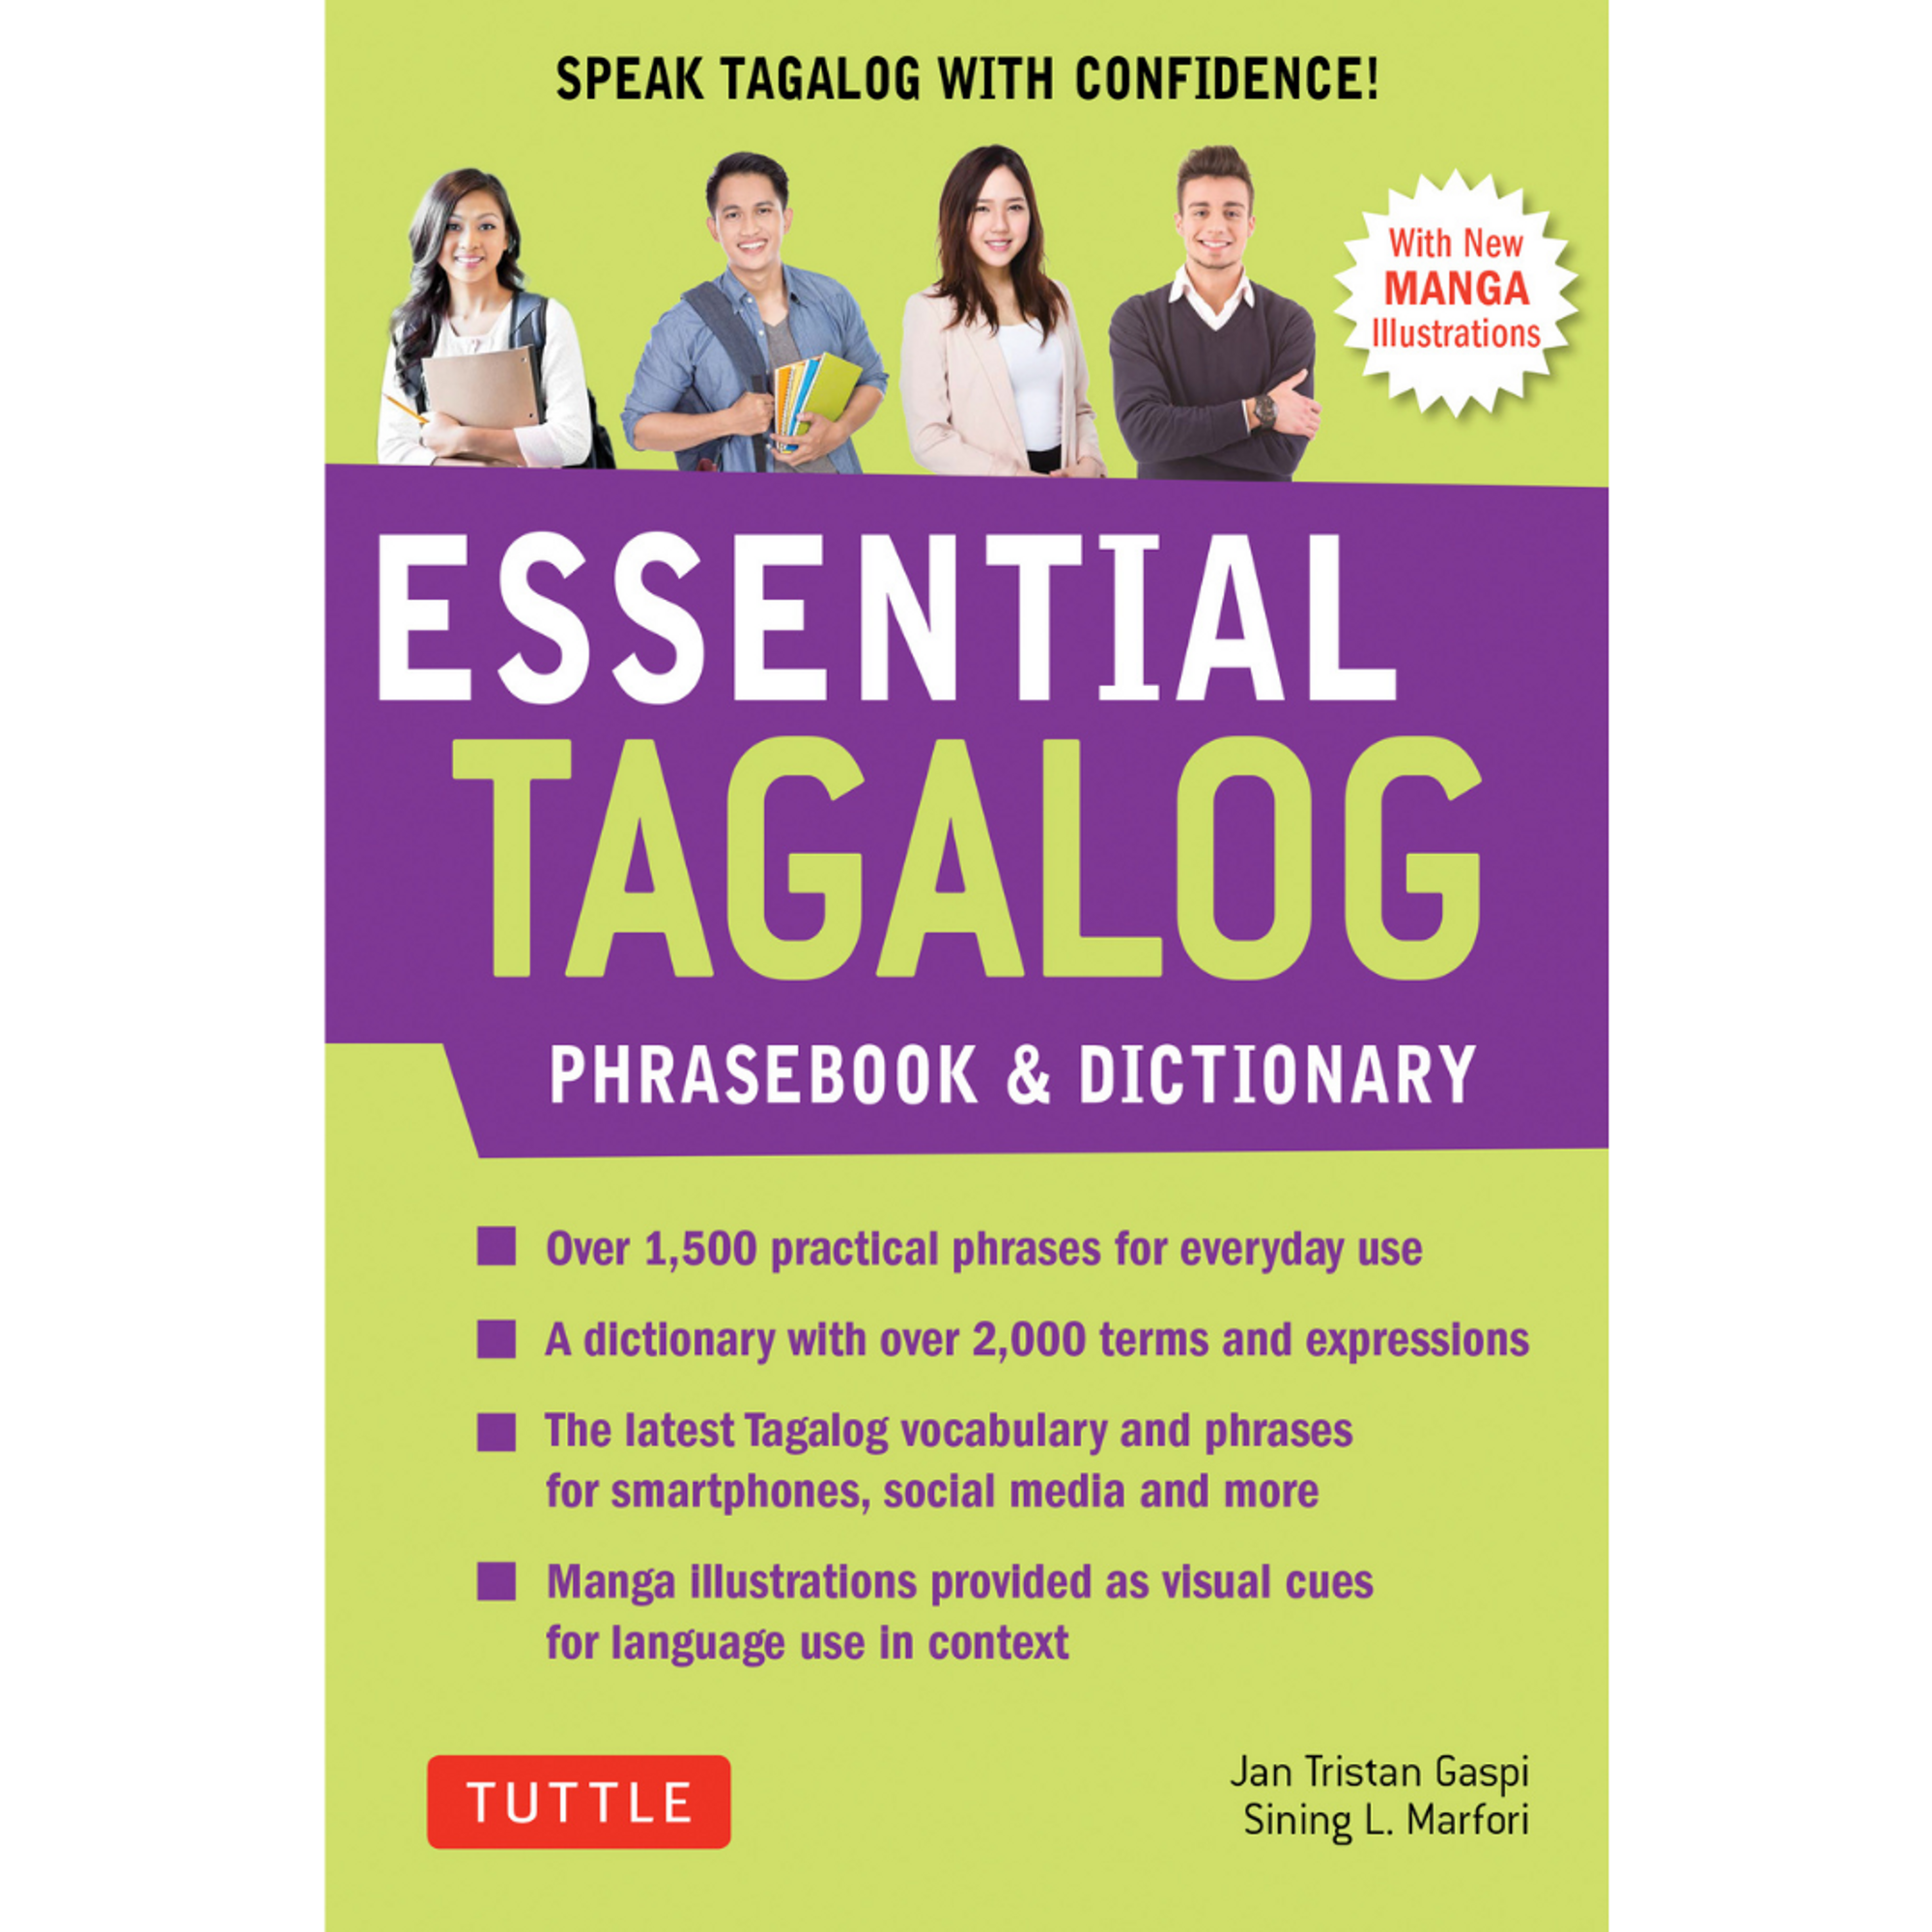  Making Out in Tagalog: A Tagalog Language Phrase Book